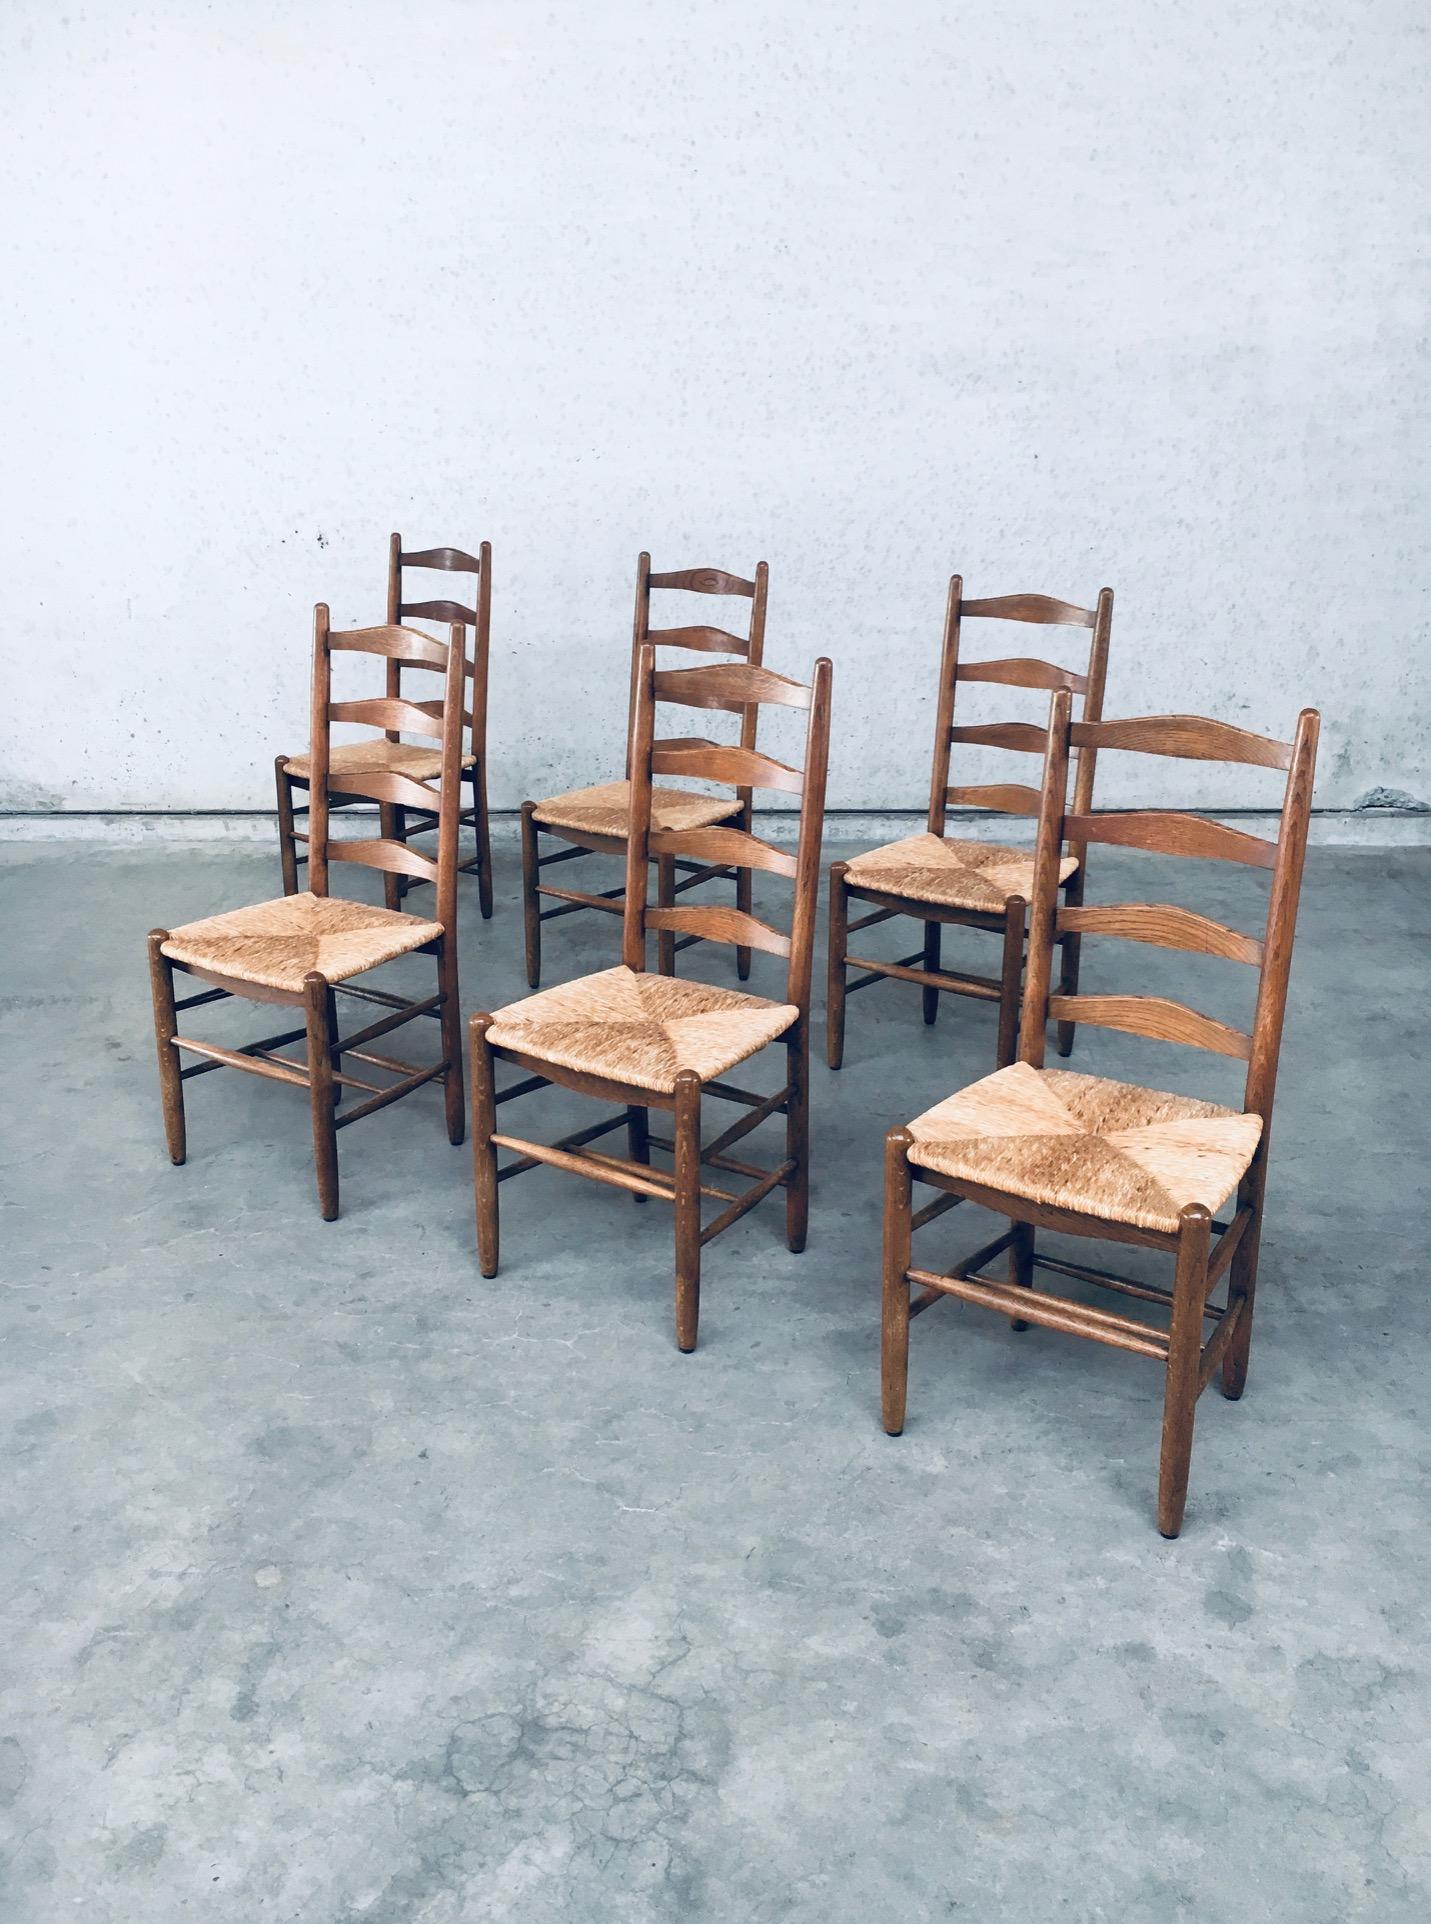 Vintage Rustic Handcrafted Oak & Rush Ladder Back Dining Chair set of 6. Made in Belgium, late 1940's, early 1950's. Solid oak constructed chair with woven rush seat. Ladder back model with several spindles in the bottom base for strenght. All